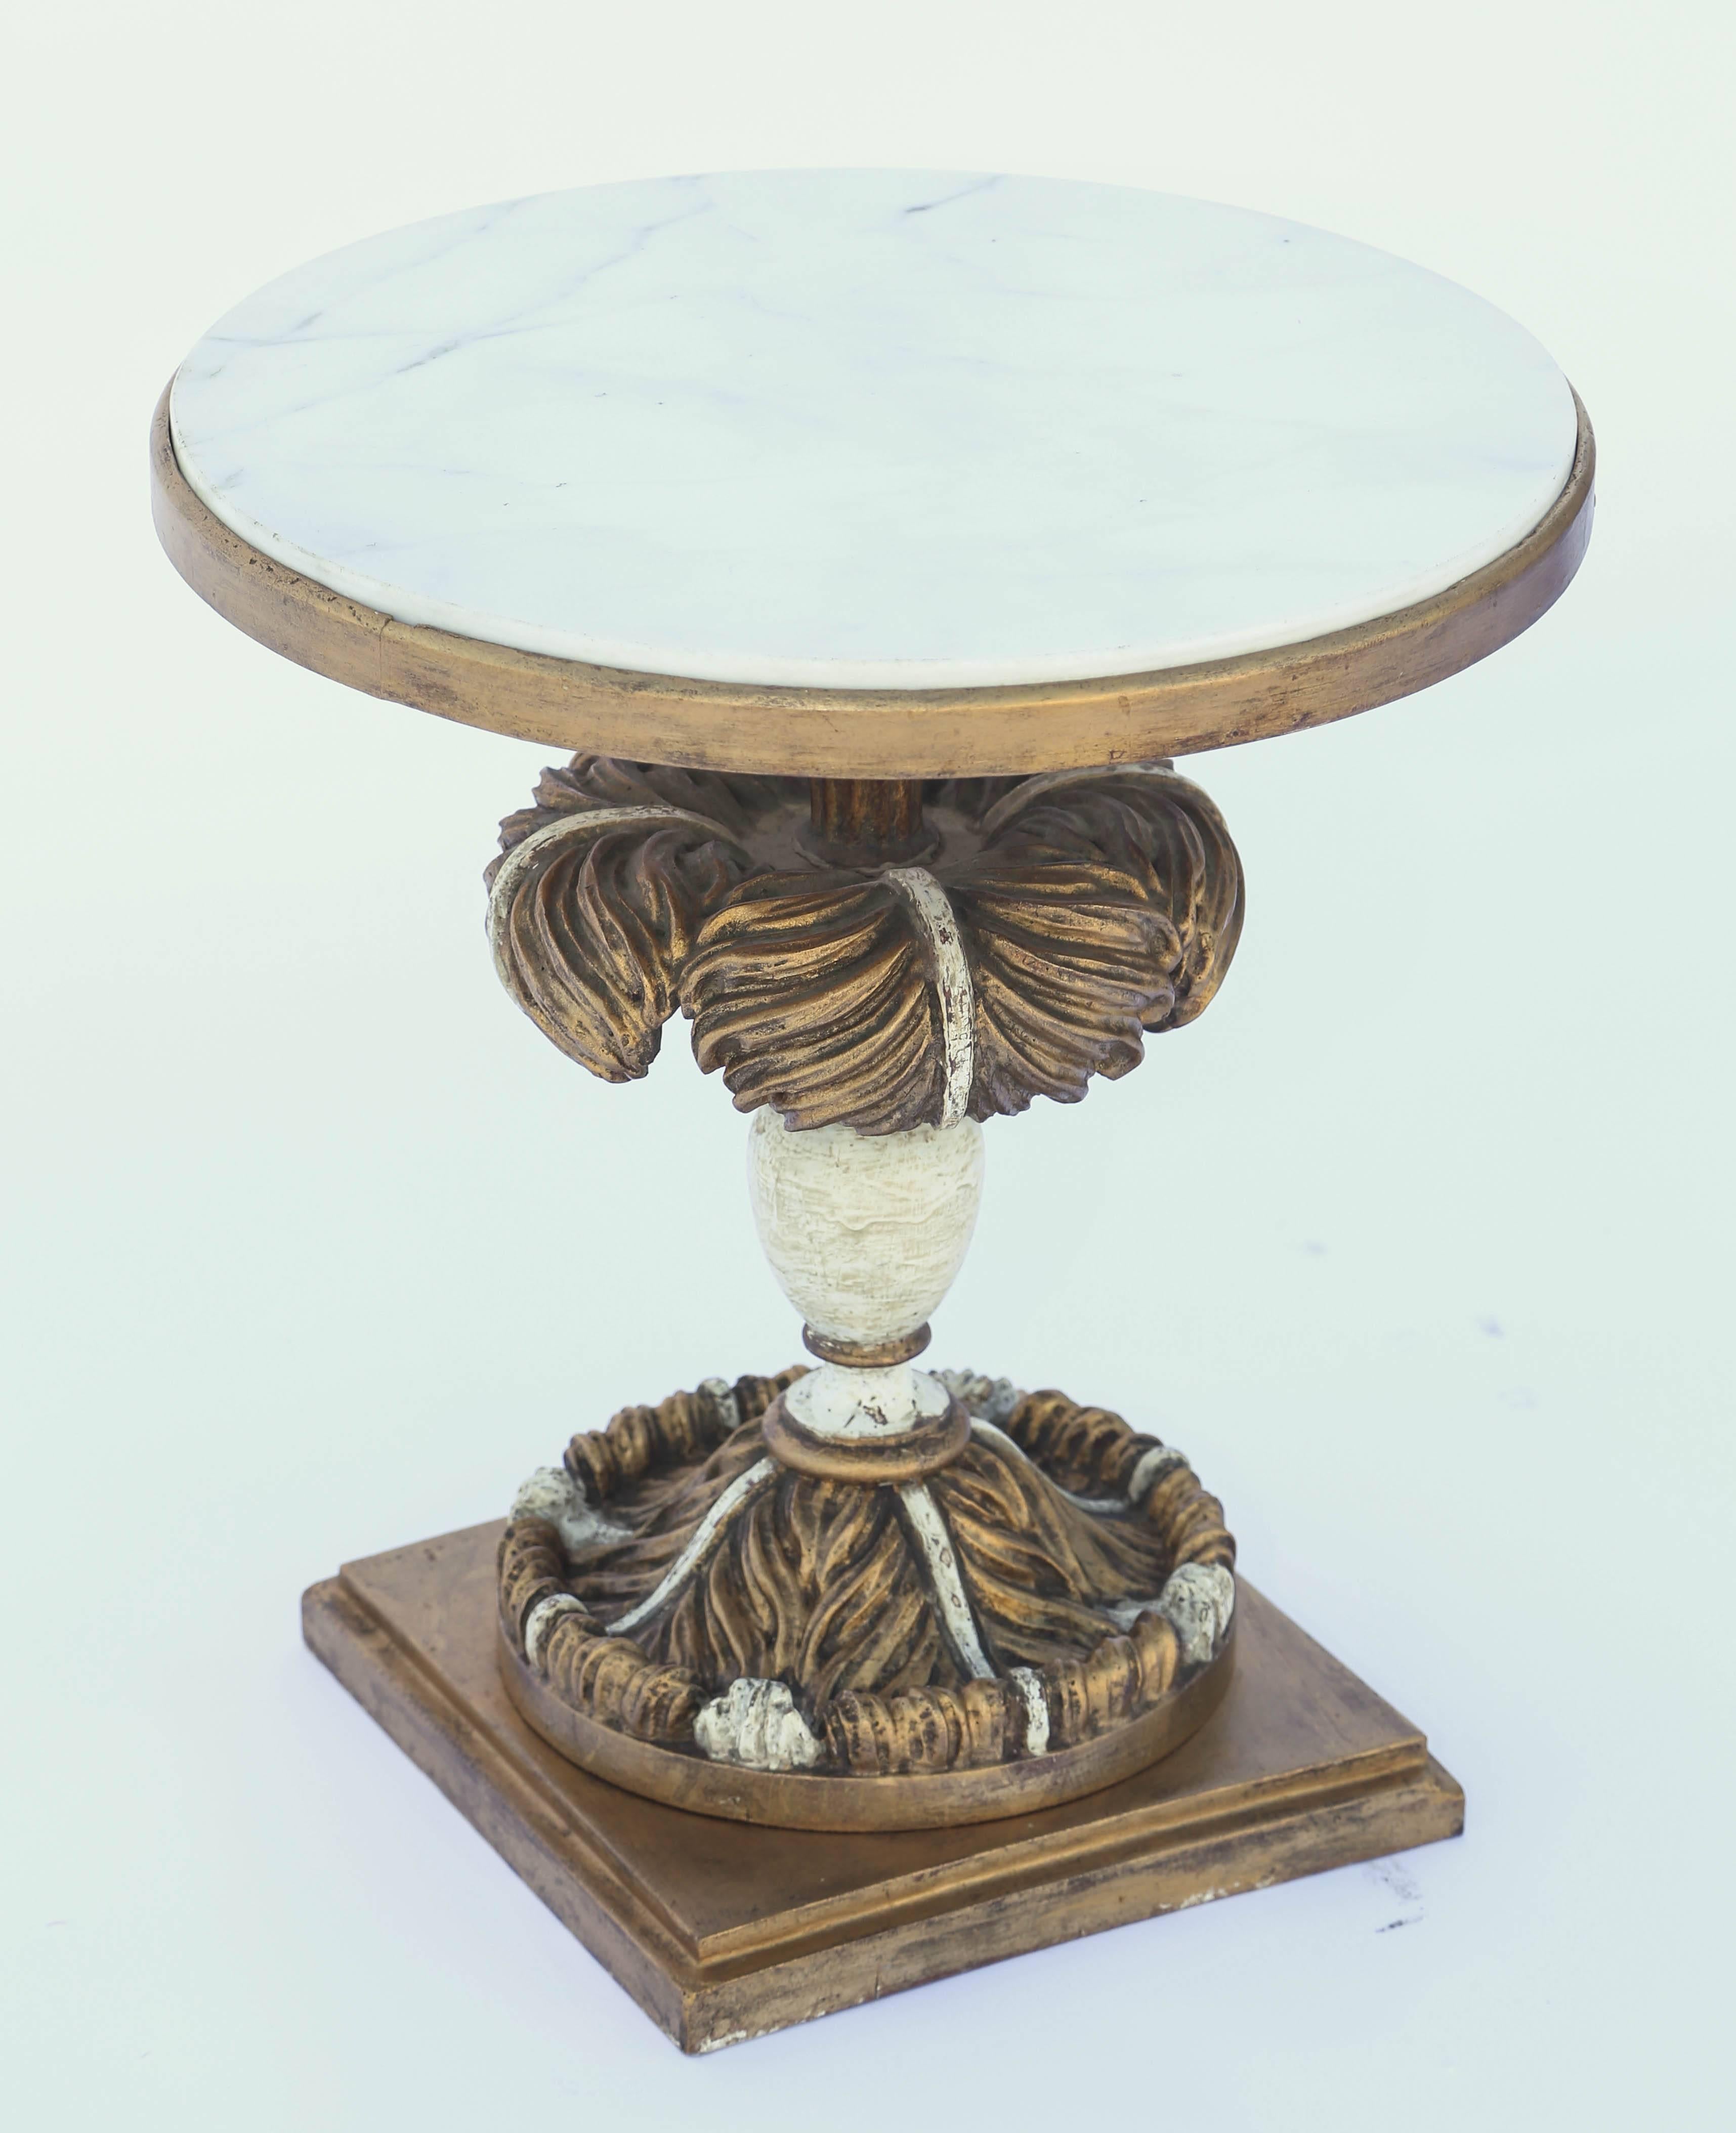 Side table, having a round top of Carrara marble, on painted and parcel-gilt pedestal base, of a hand-carved plume into a balustrade, on similar carved foot, set upon a graduating square plinth.

Stock ID: D8471